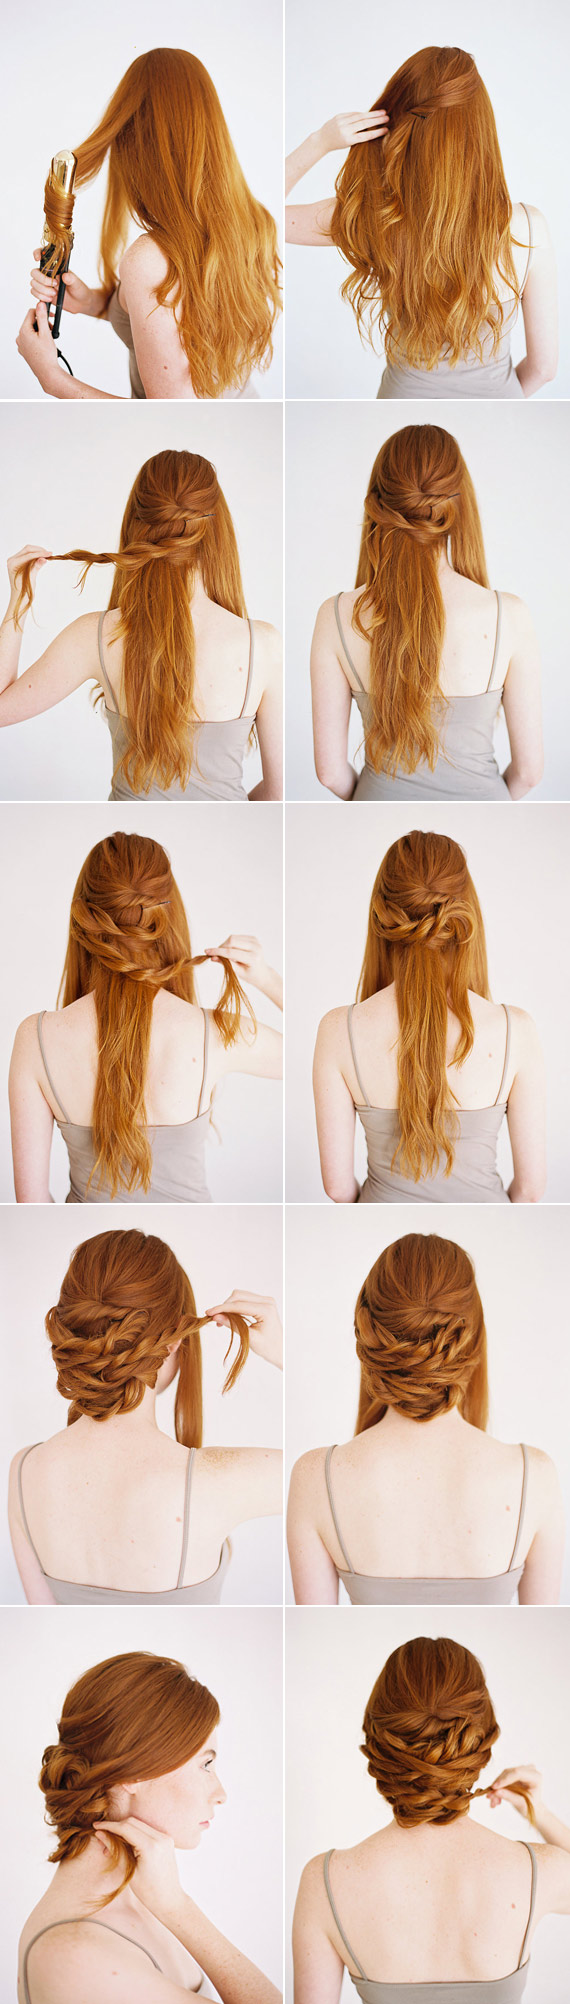 Updo Hairstyles Step-By-Step Instructions